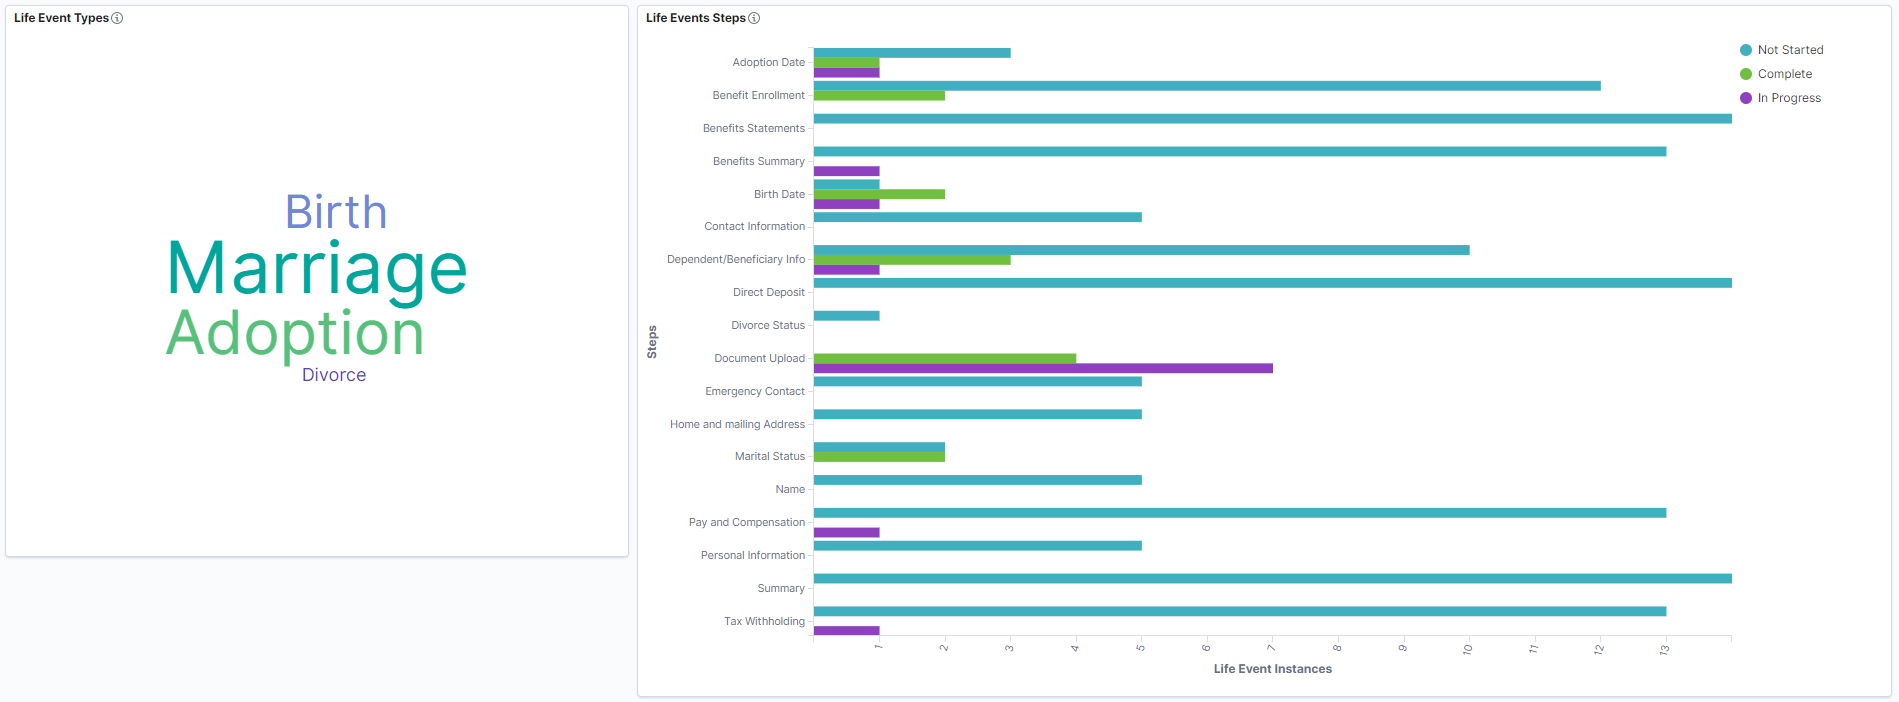 Life Events Insights Dashboard (Page 4 of 4)